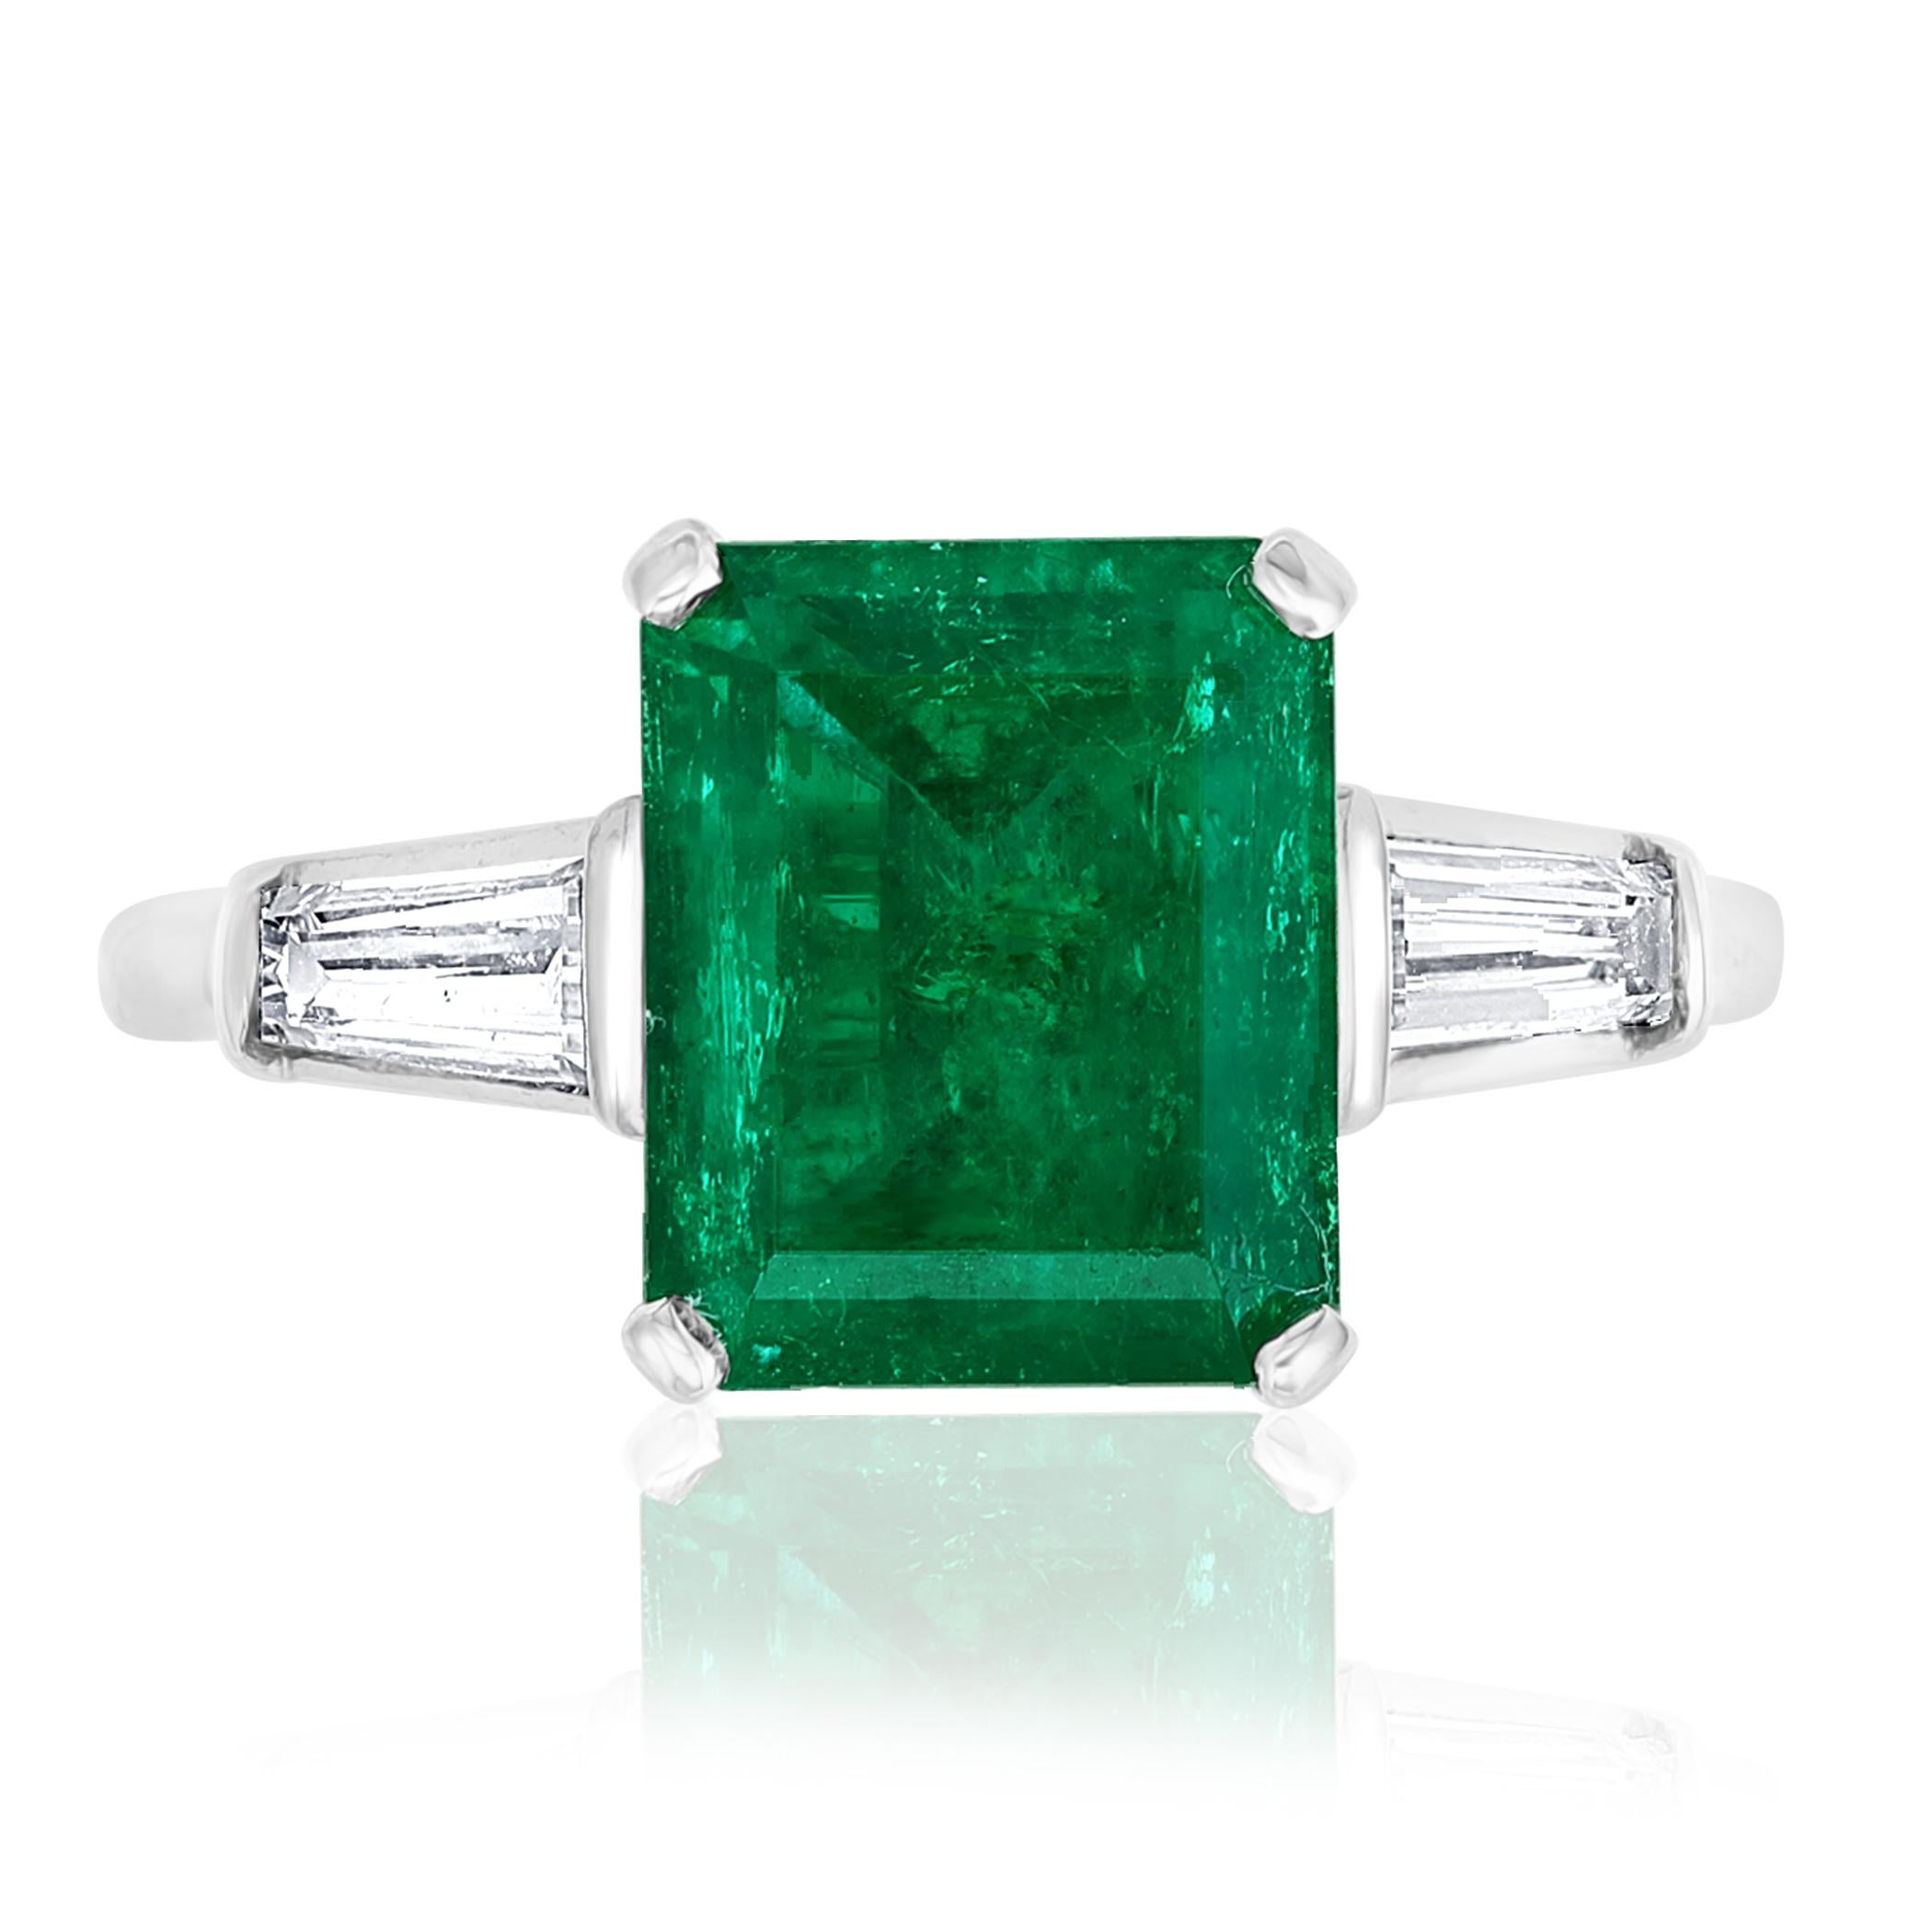 Wonderful  Emerald cut columbian Emerald weighing 3.04 carats. The emerald has a deep green color and is eye clean. The ring has 2 baguette diamond side stones weighing 0.18 carats total. Made in 14K white gold. Size 6.5 (sizable).

One of a Kind 